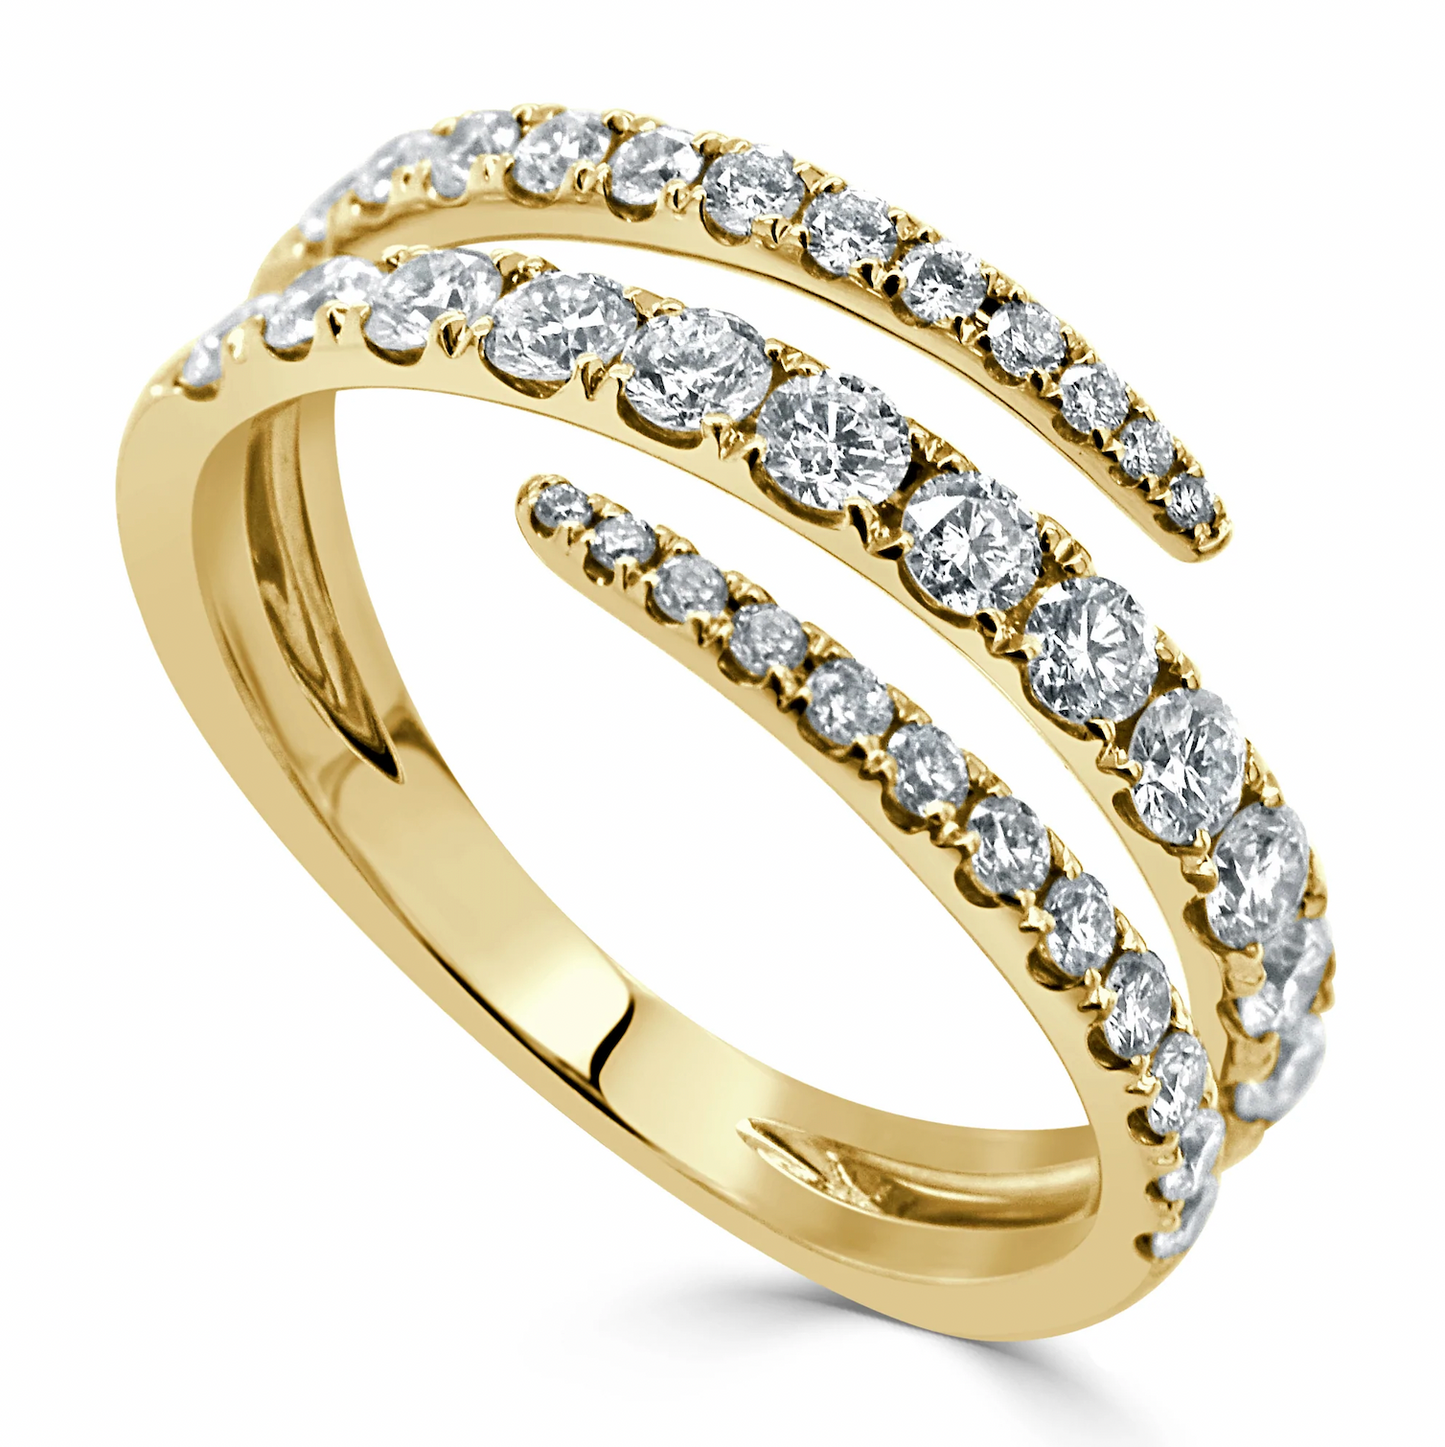 Load image into Gallery viewer, Diamond Wrap Ring
